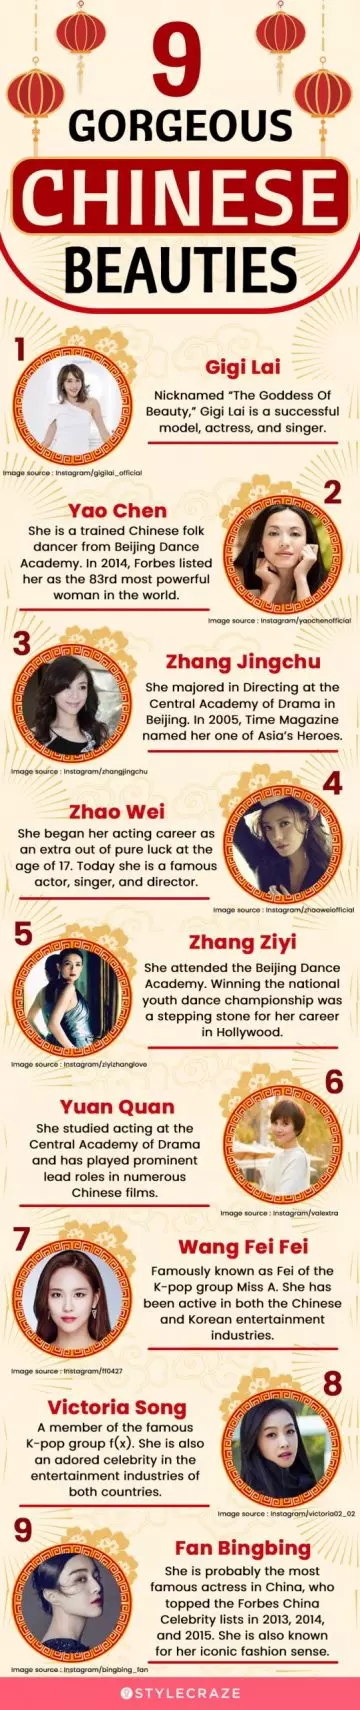 9 gorgeous chinese beauties (infographic)